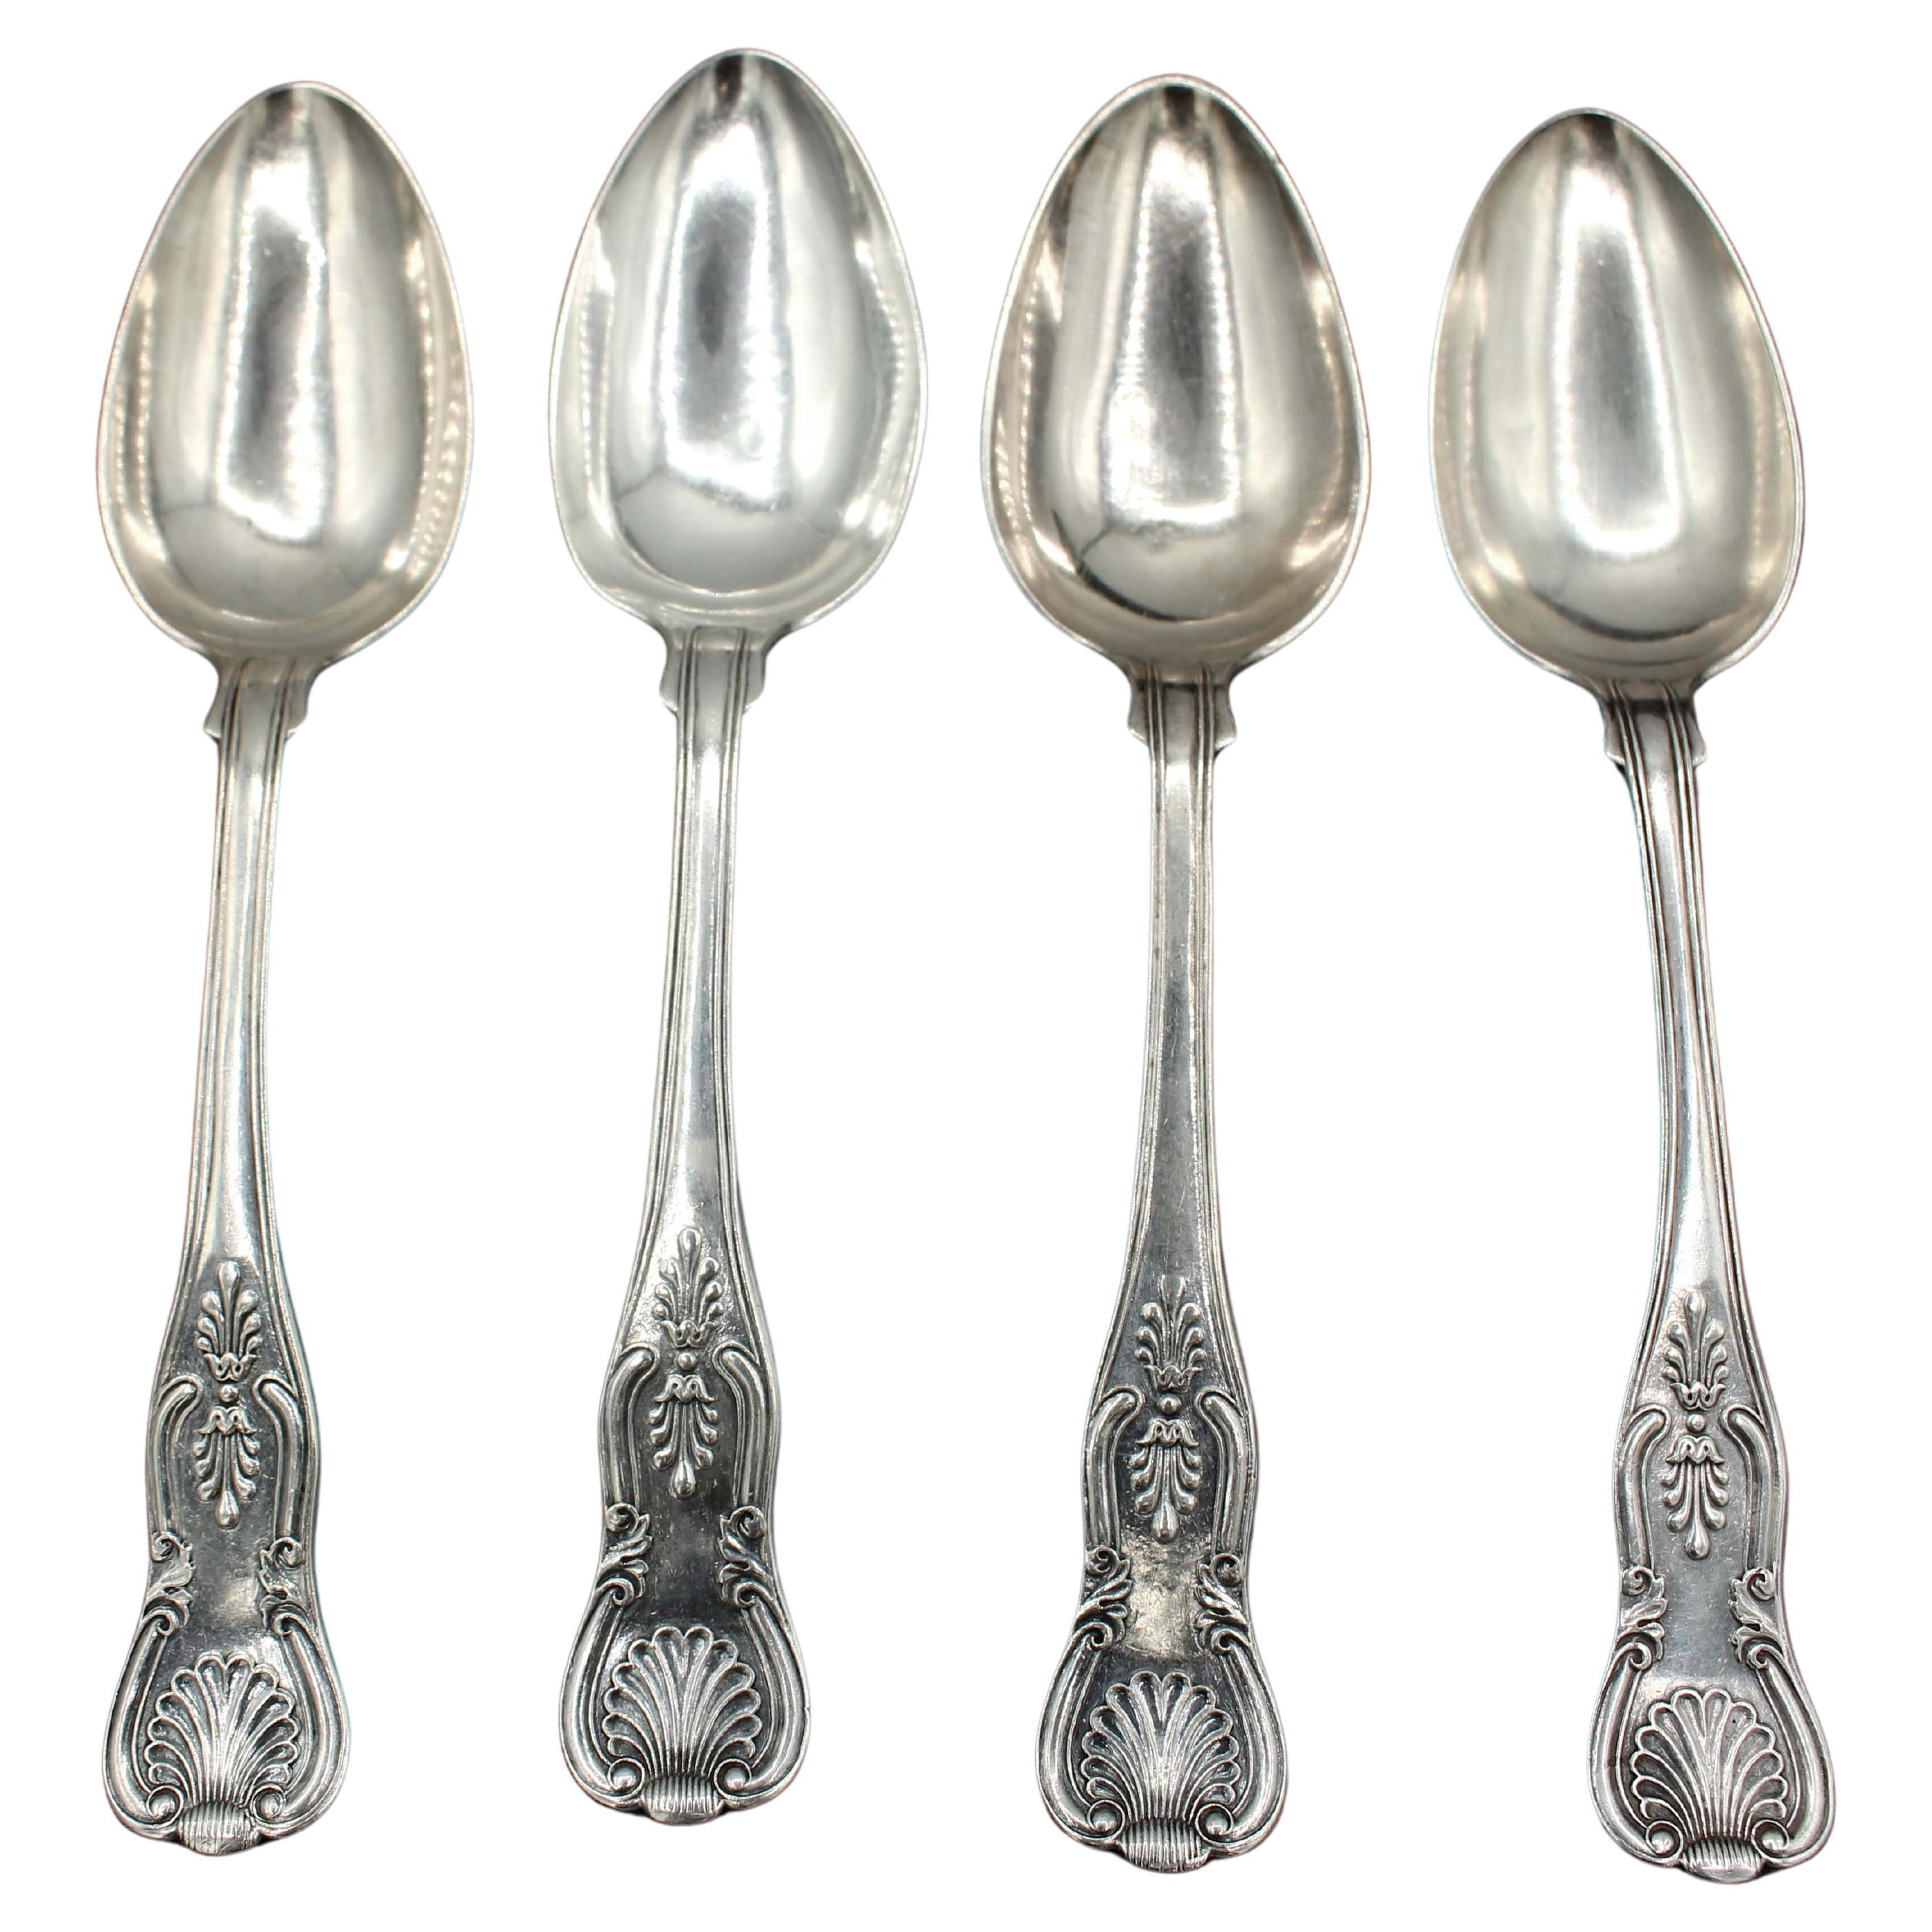 1860 Set of Four "Kings" Pattern Silver Spoons